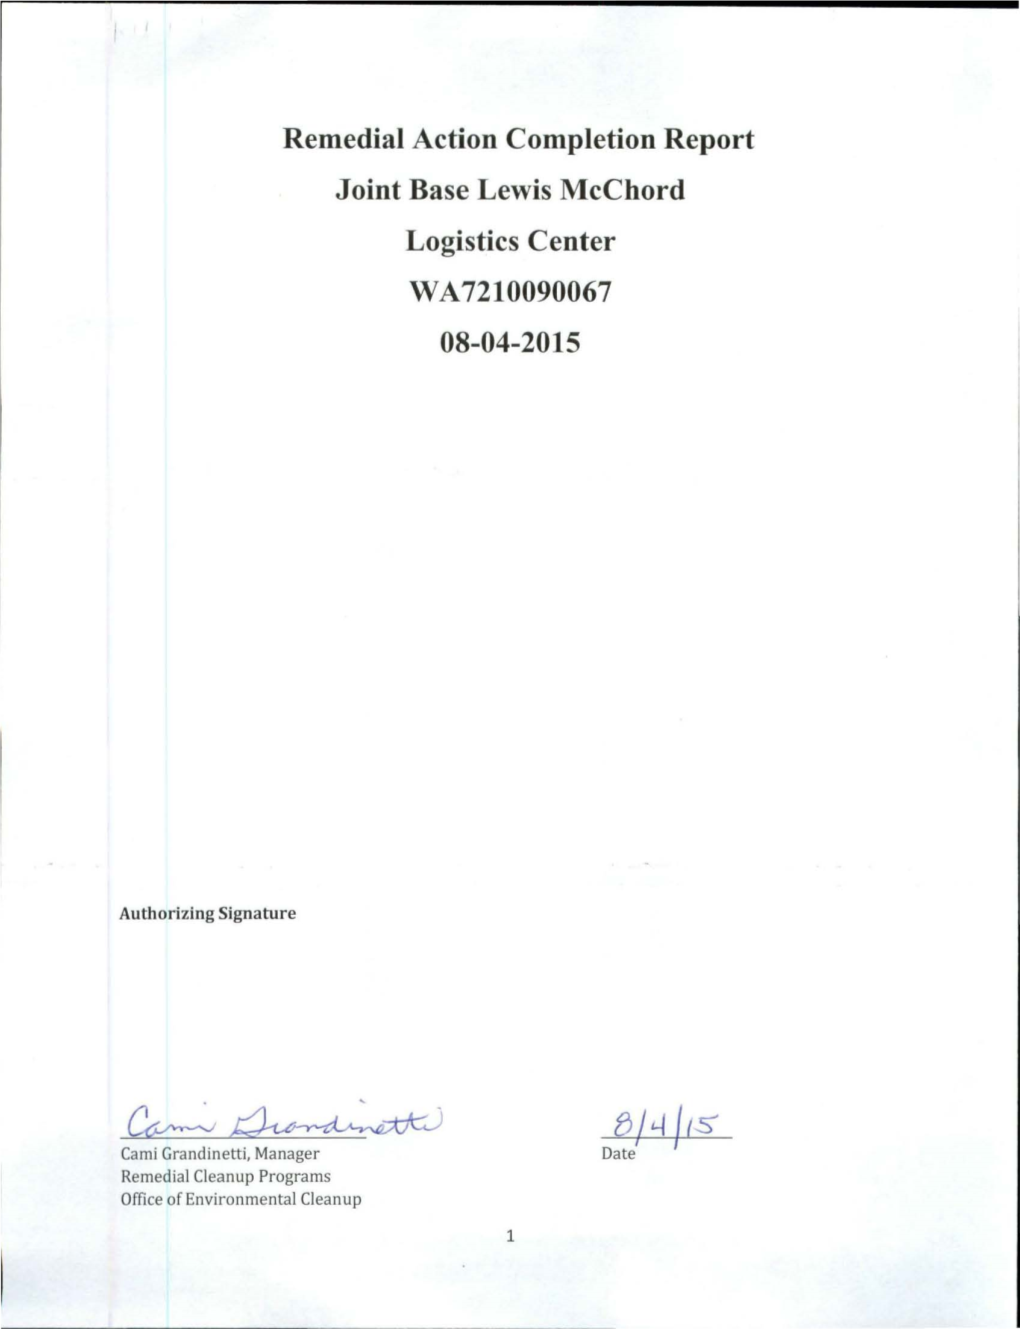 Remedial Action Completion Report, Joint Base Lewis Mcchord